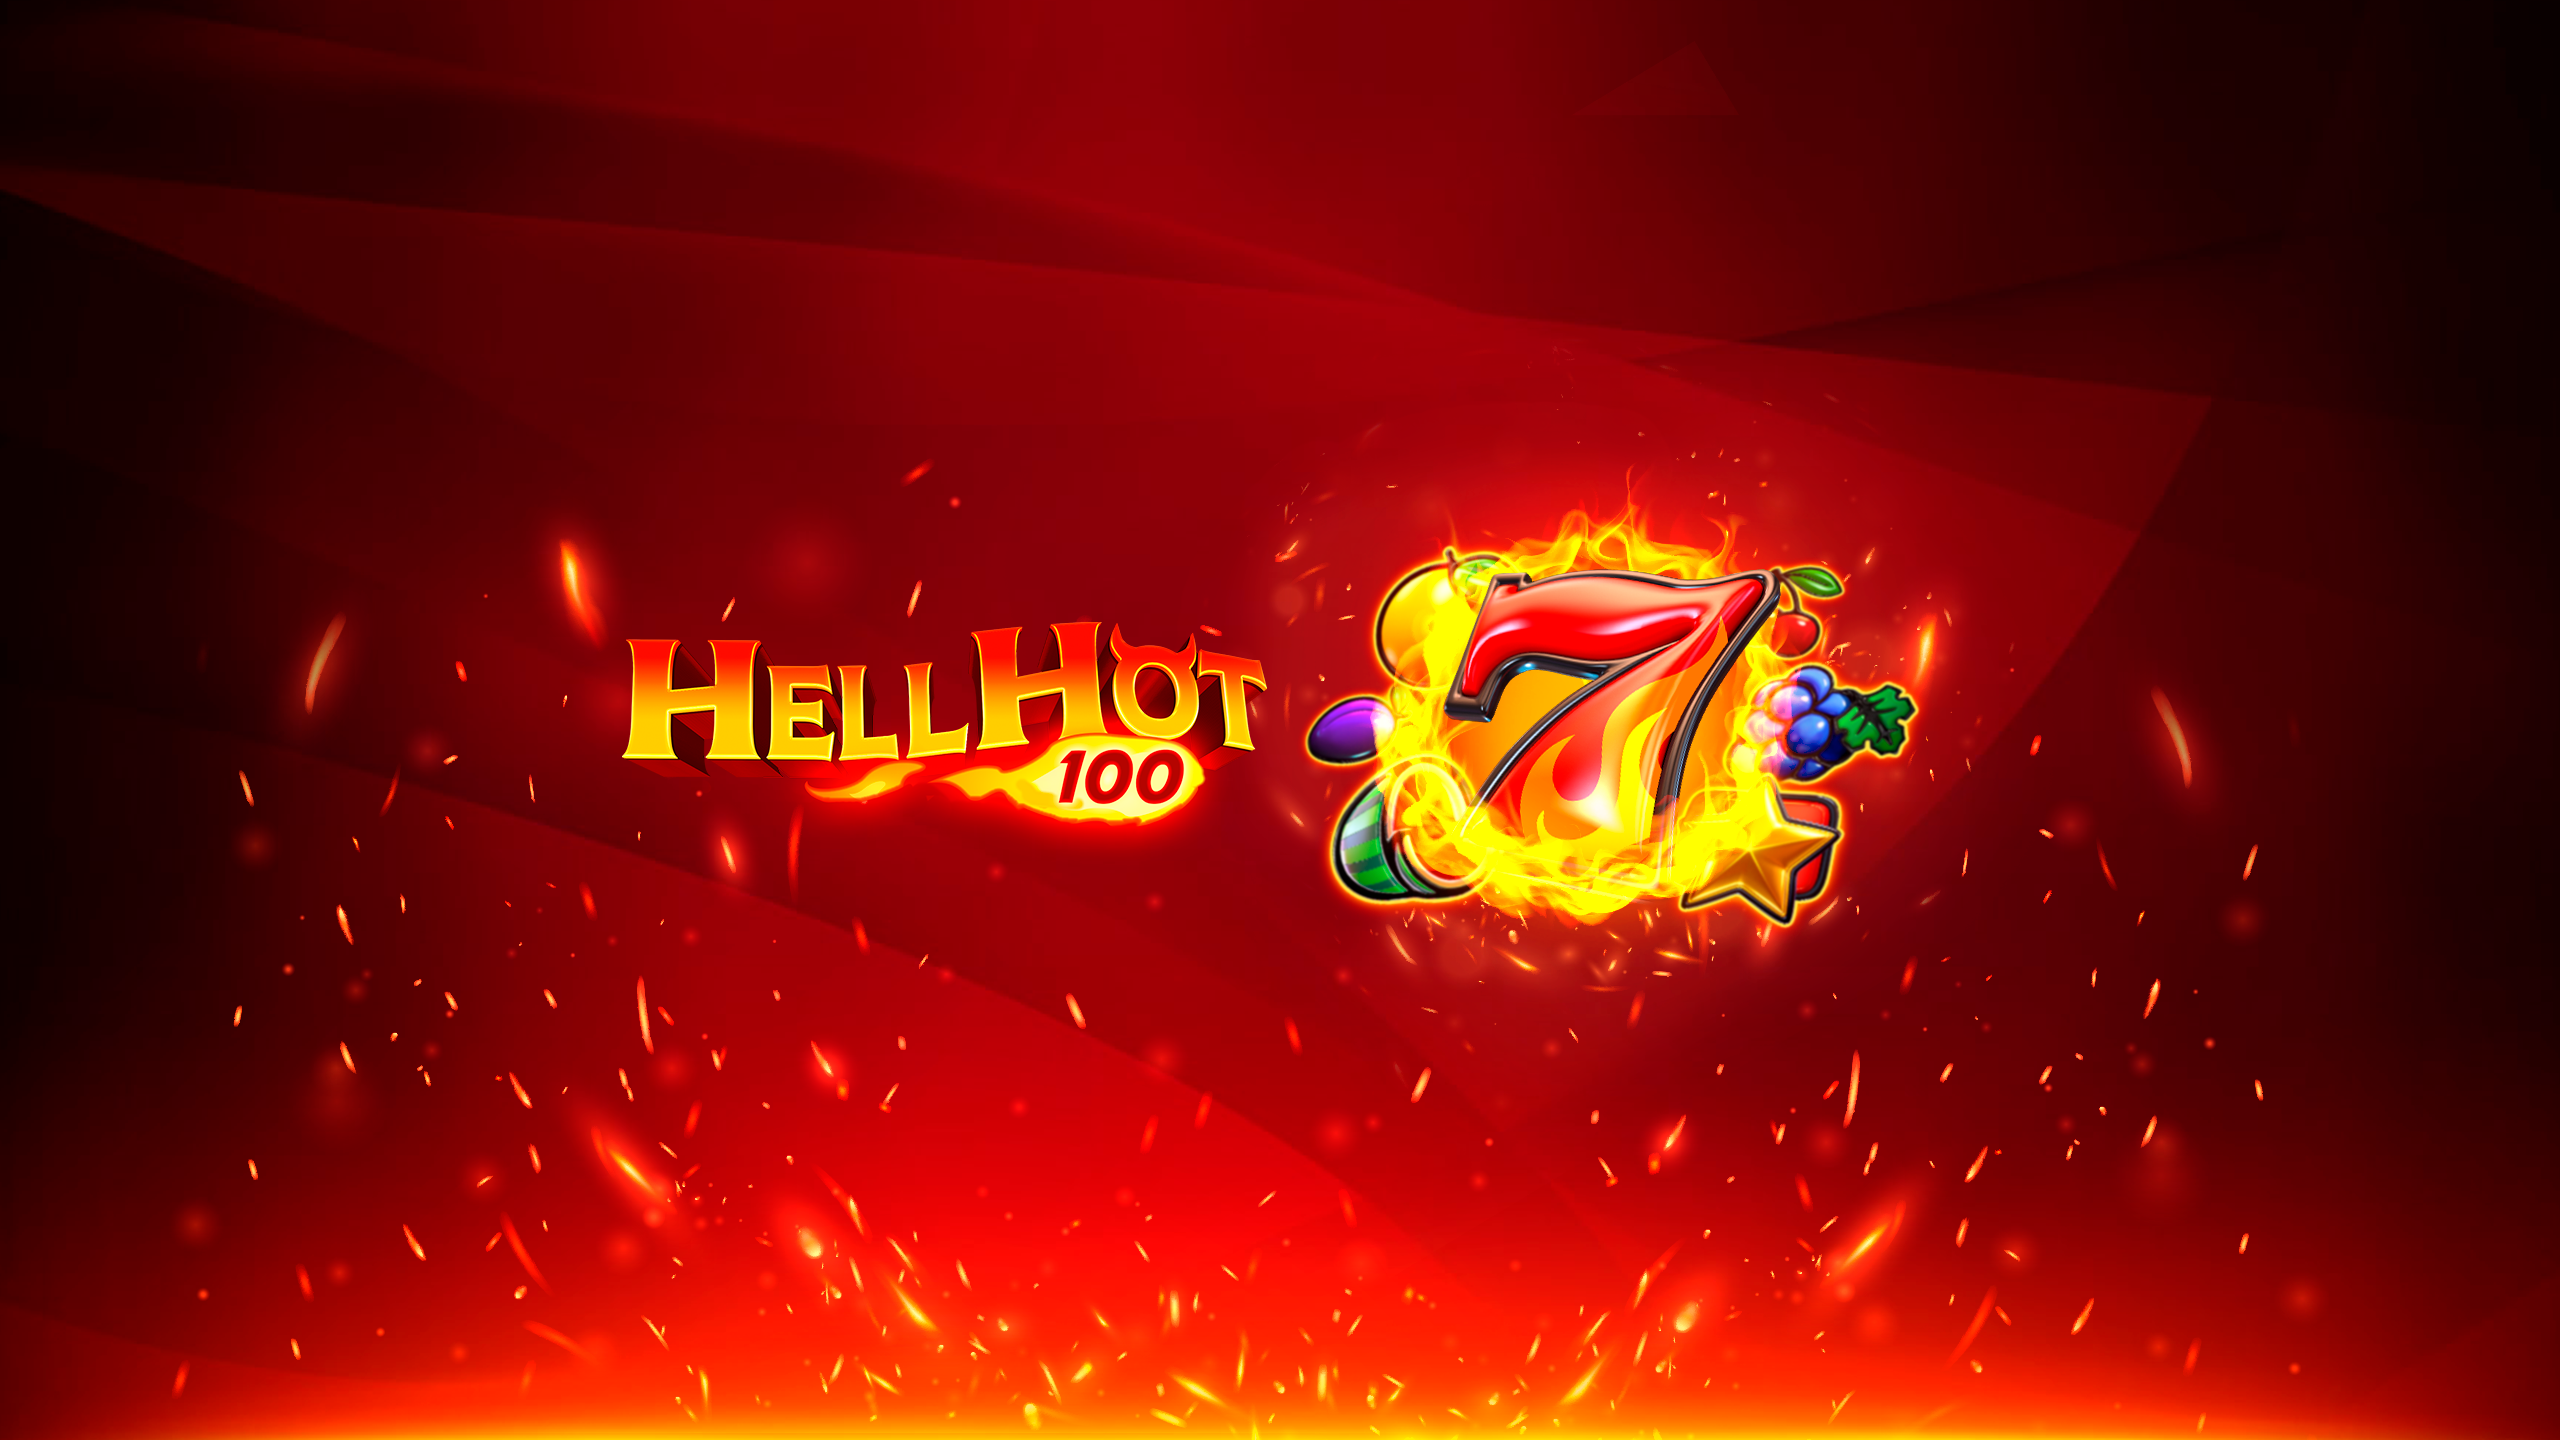 Hell Hot 100 demo